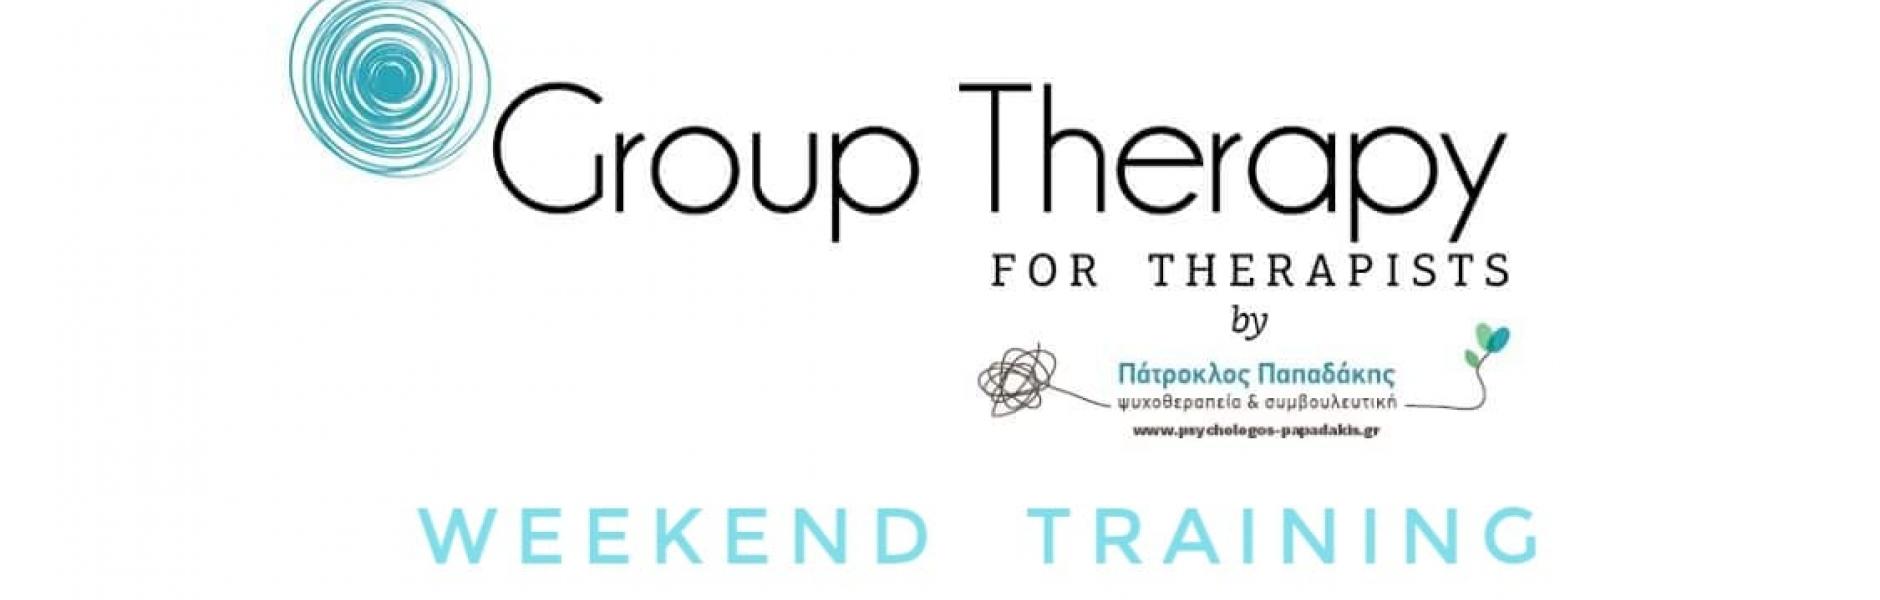 Group Therapy for Therapists: Weekend Training